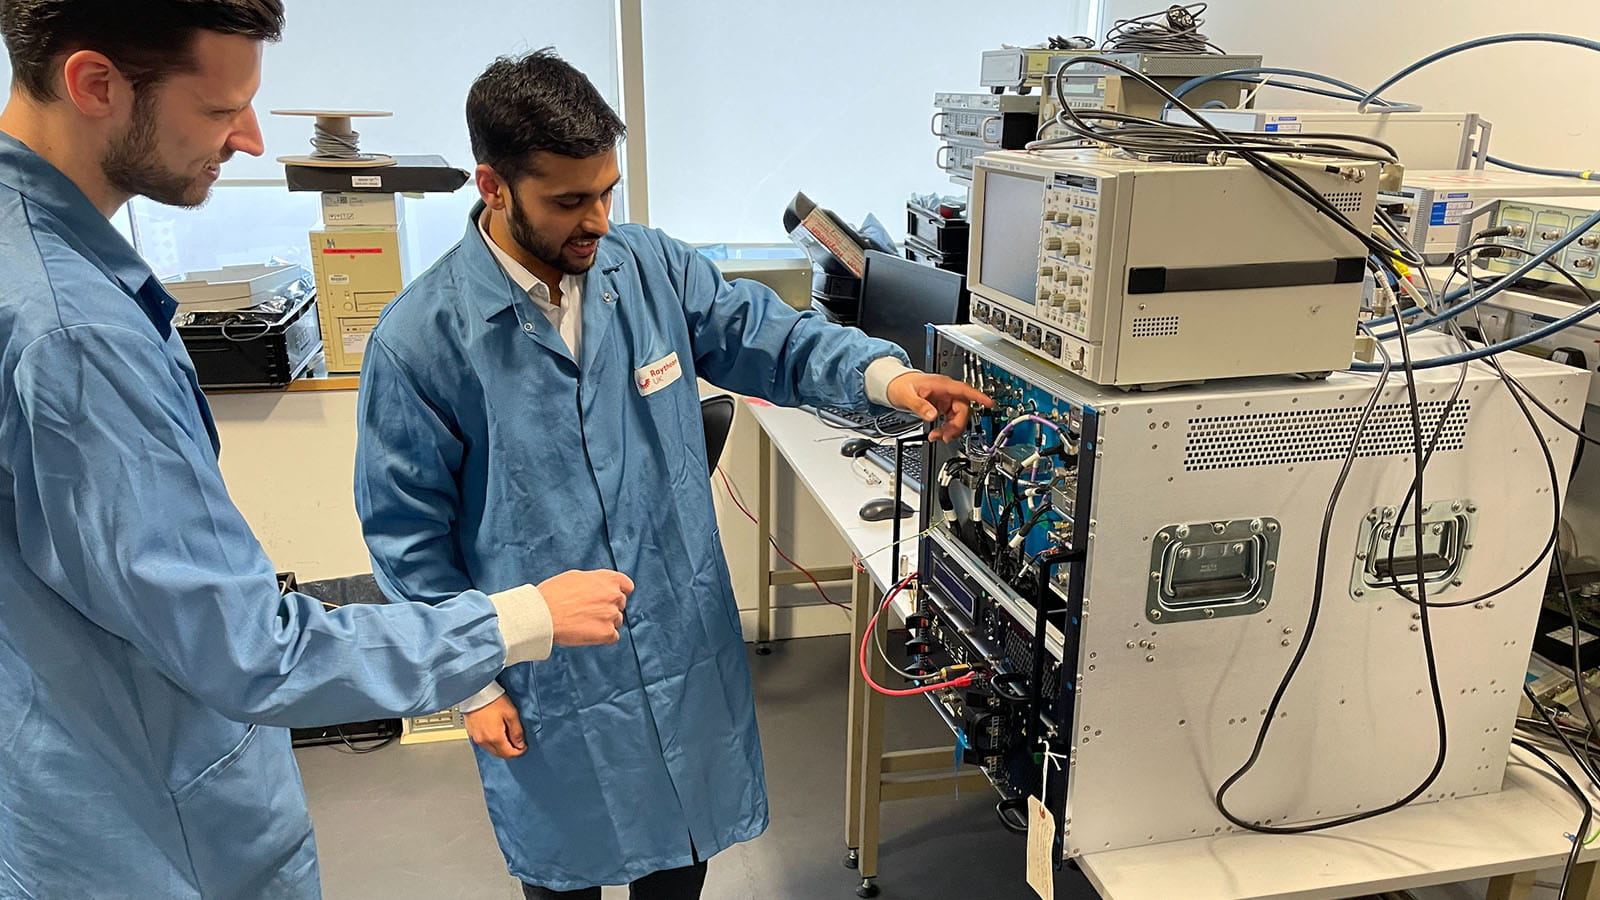 Chinmay and his colleague set up a Condor MK3 interrogator for testing